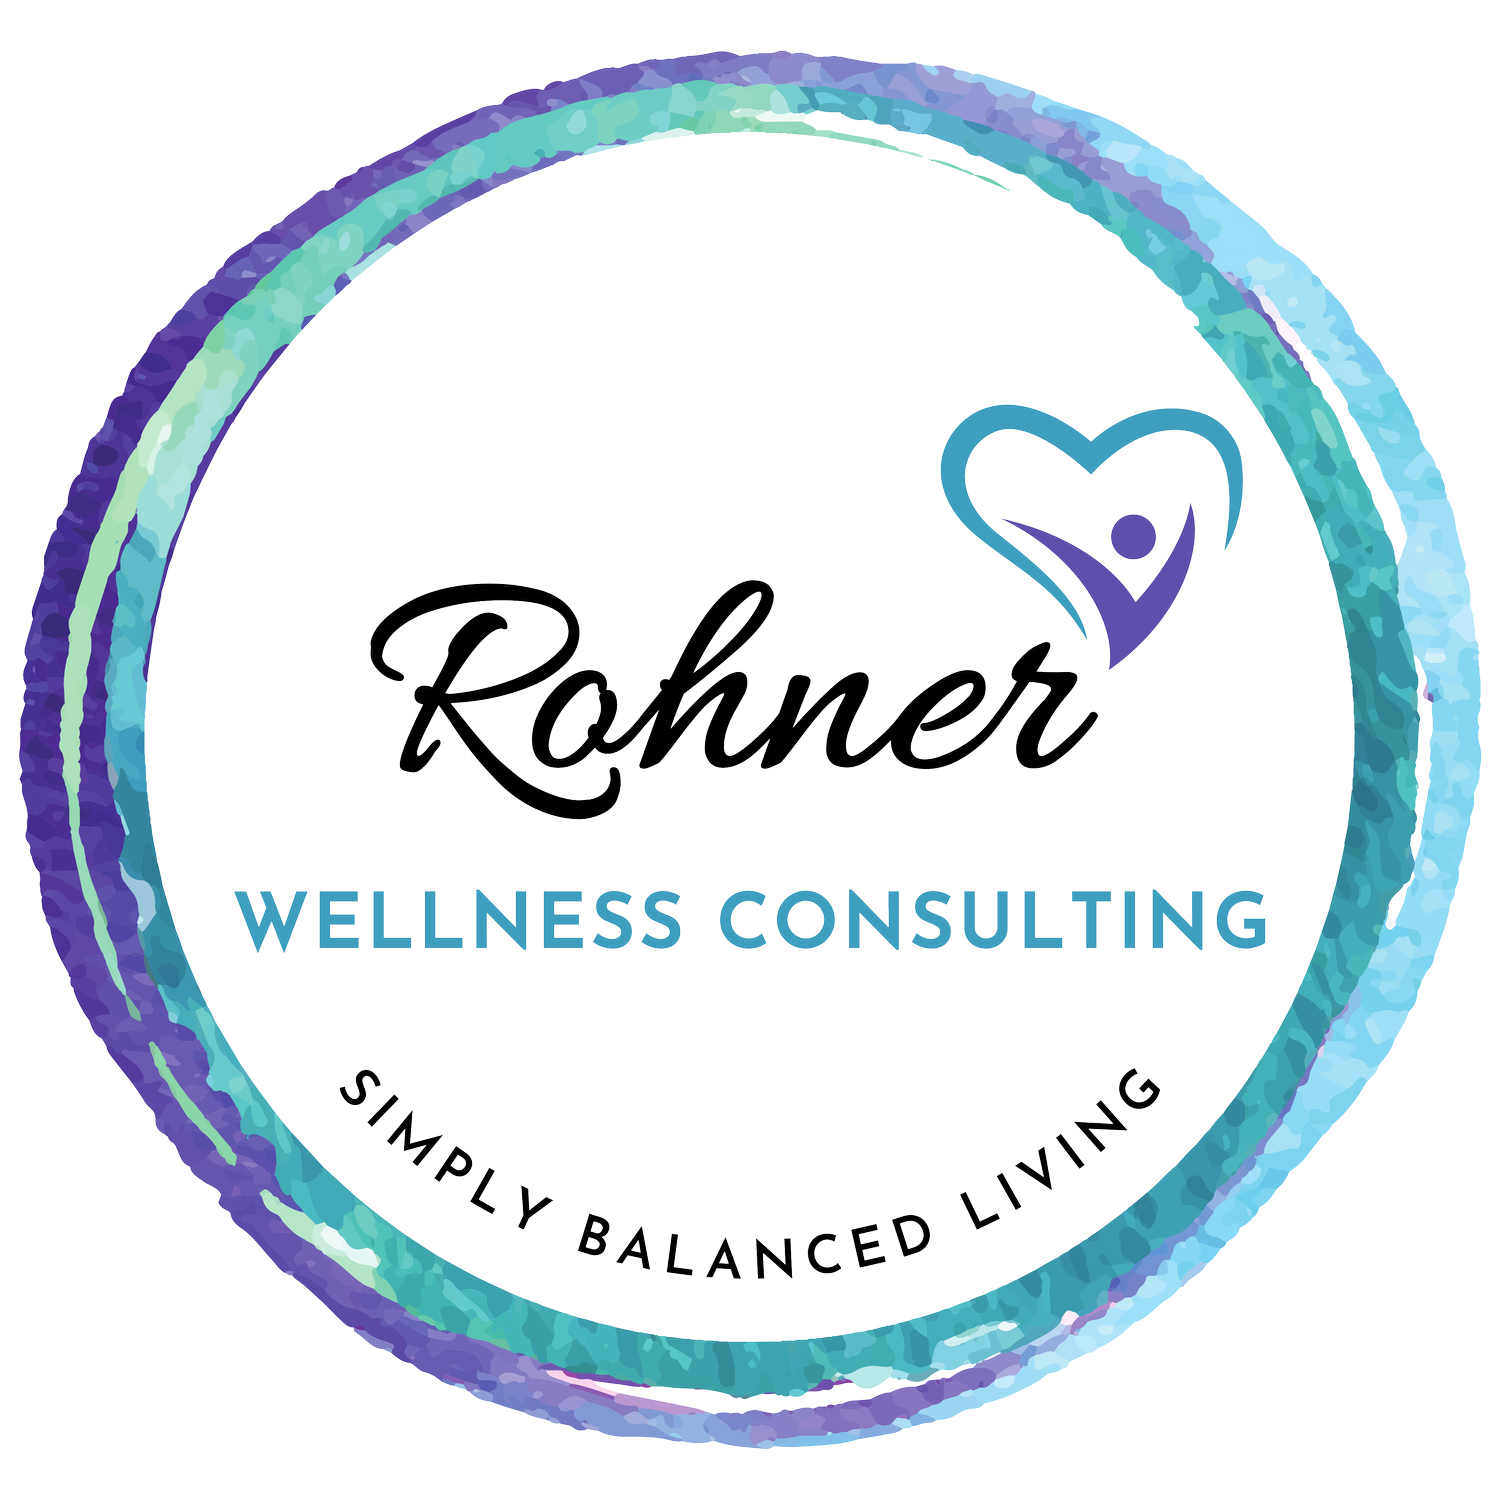 Rohner Wellness Consulting